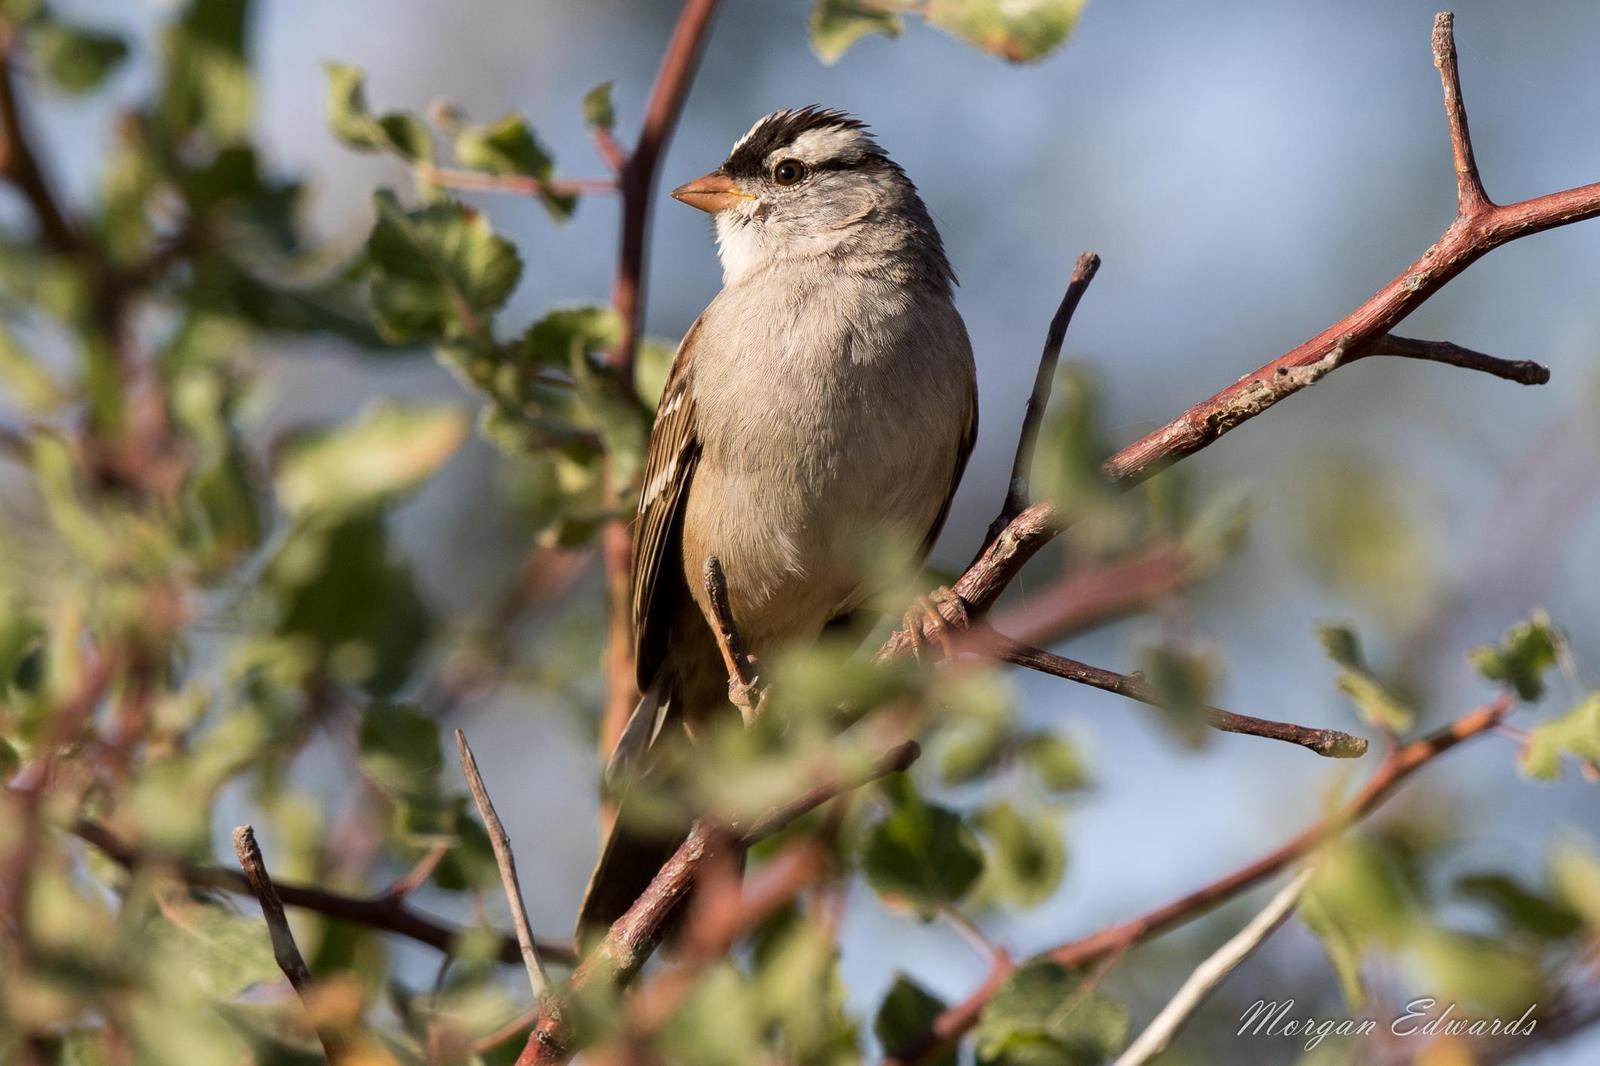 White-crowned Sparrow Photo by Morgan Edwards